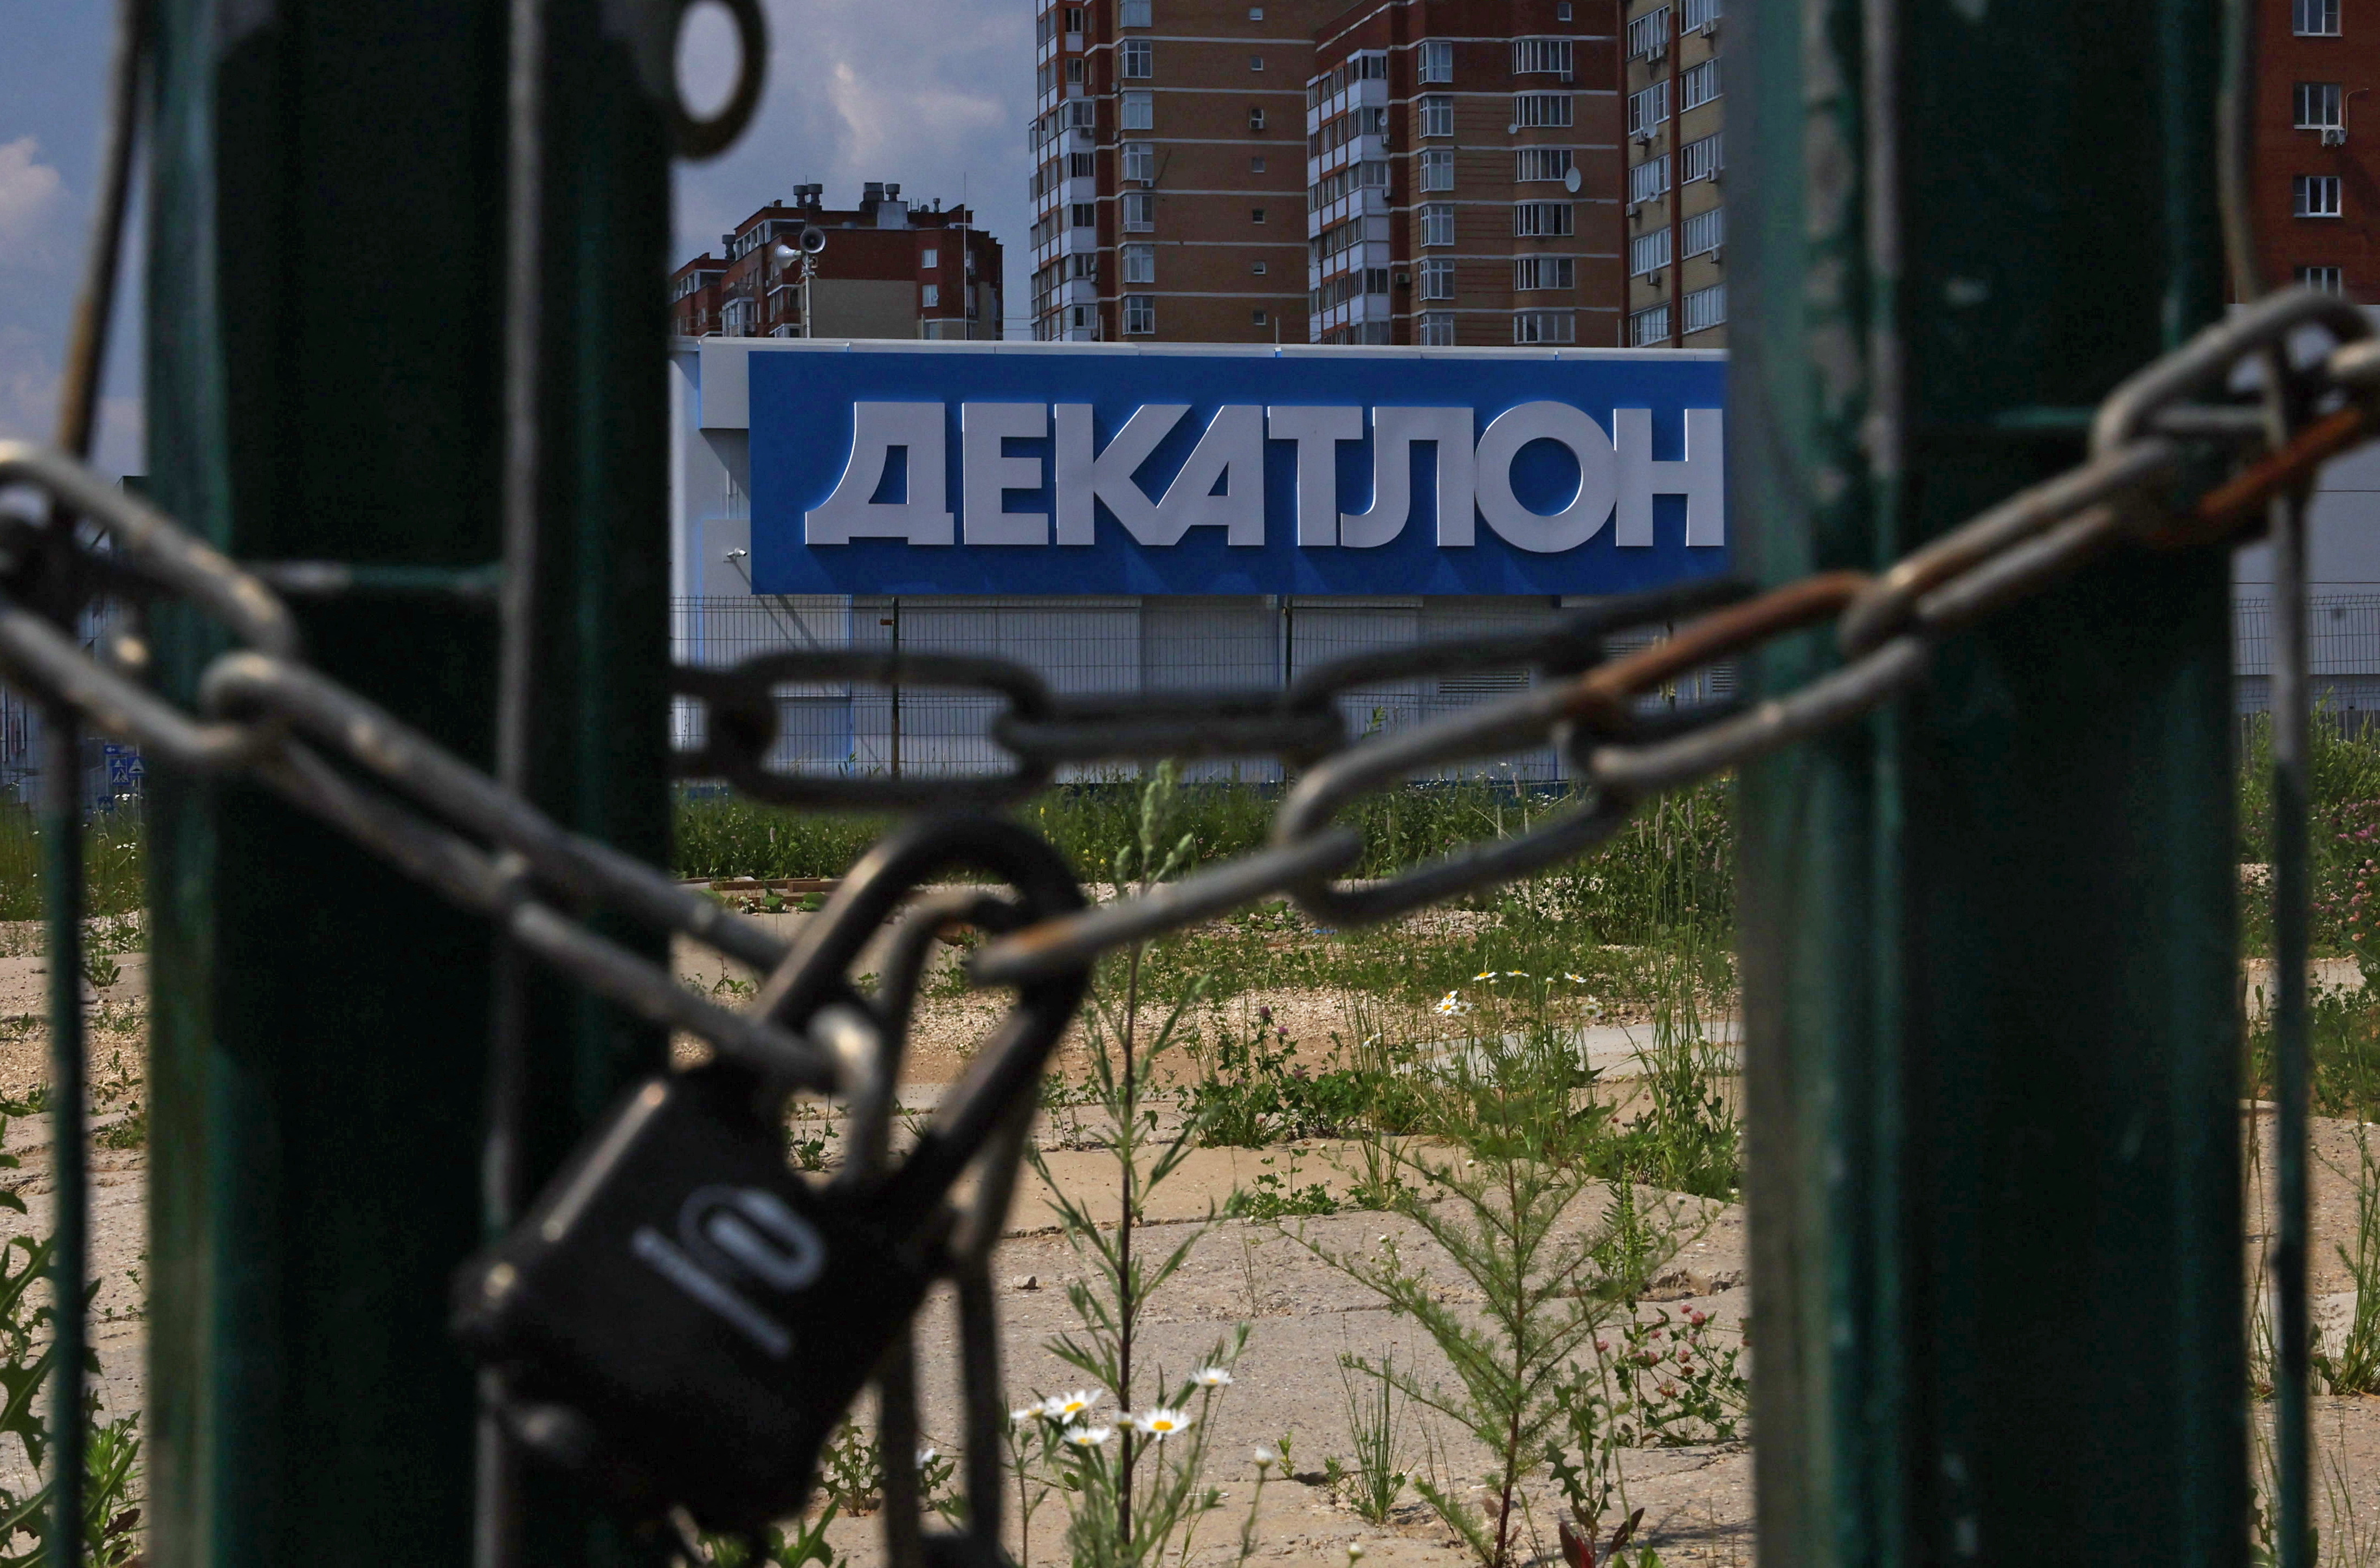 The logo of the Decathlon sporting goods retailer is seen on a closed store in Mytishchi